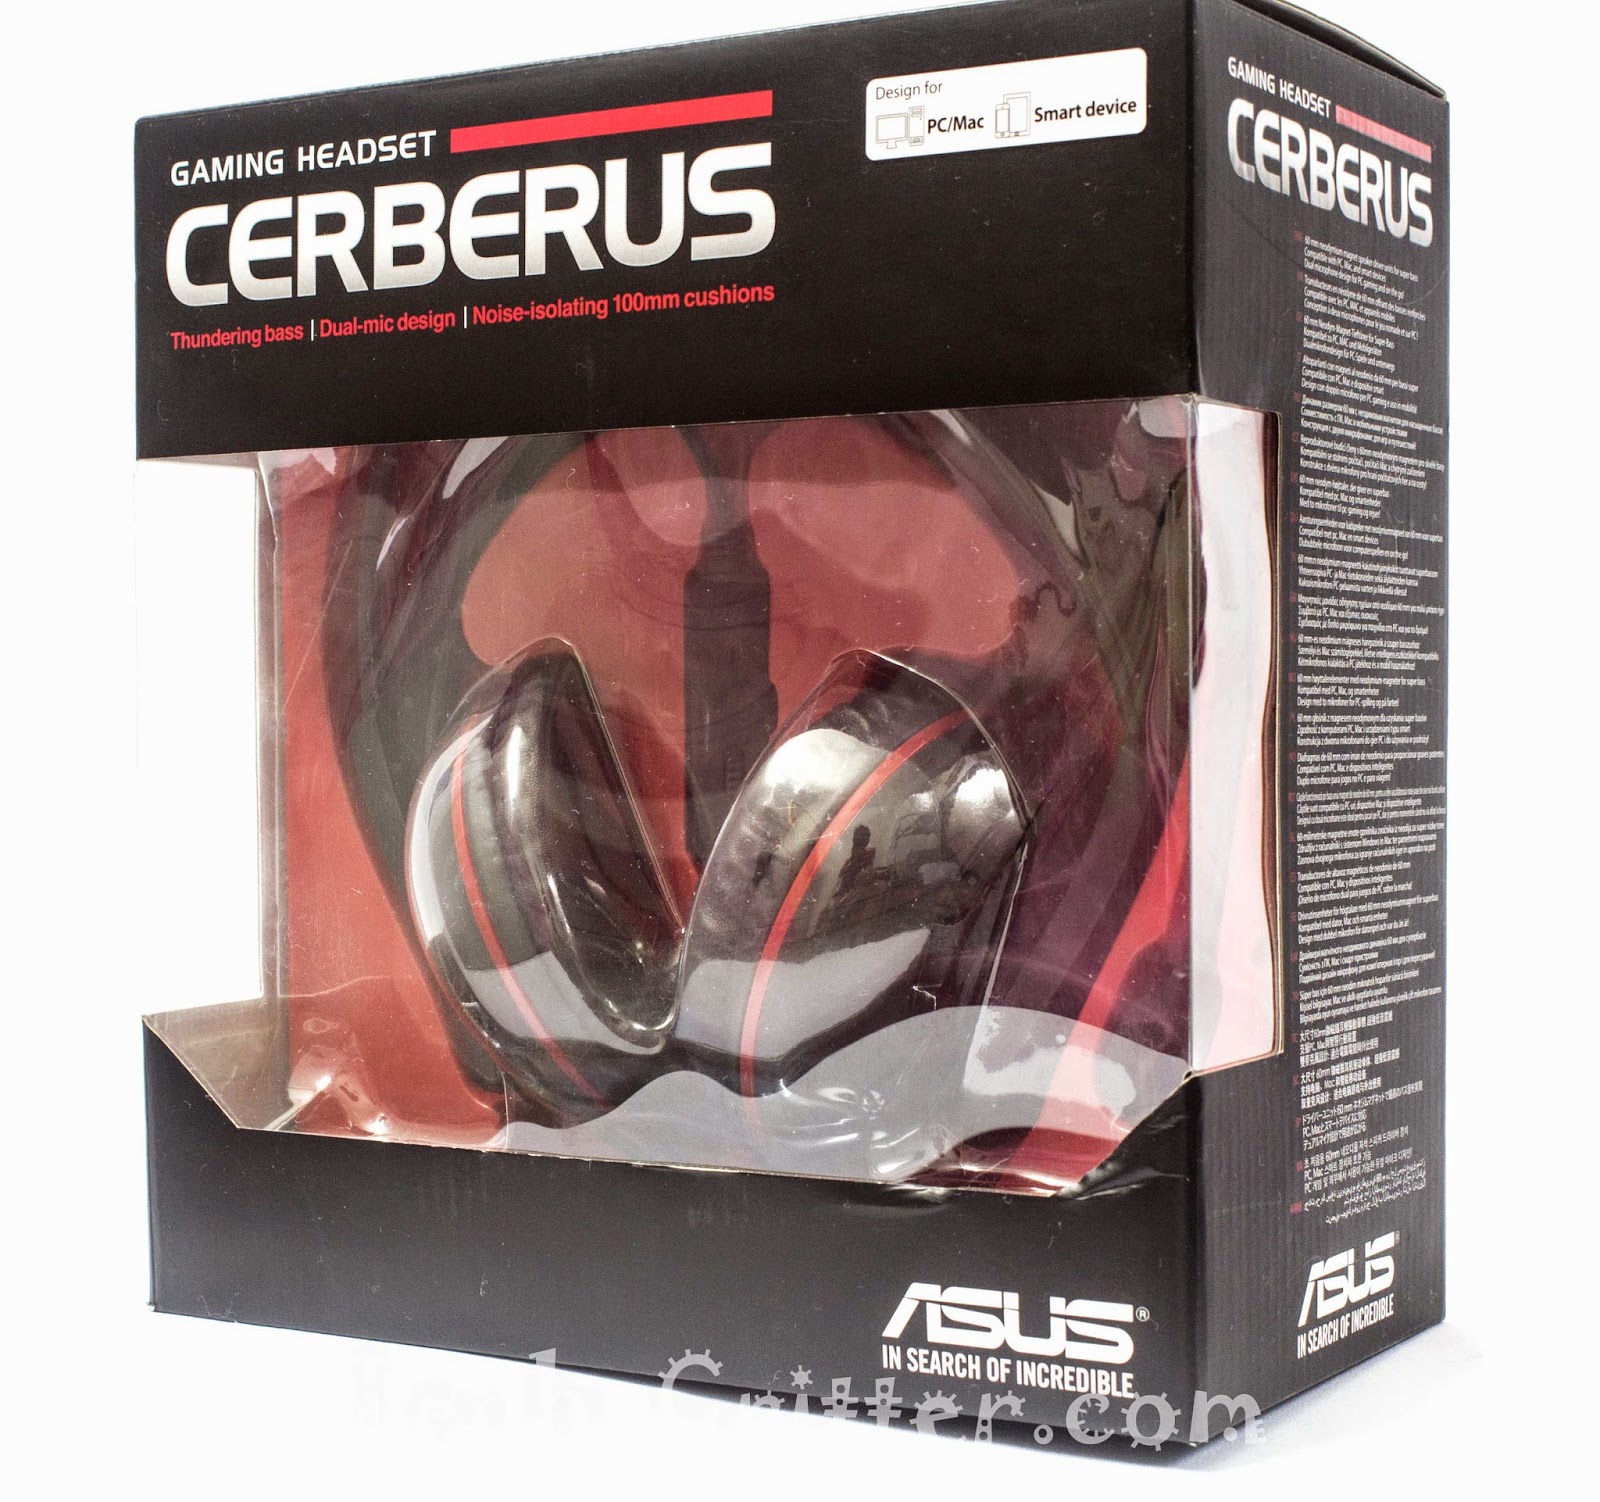 Unboxing & Review: ASUS Cerberus Gaming Headset 6